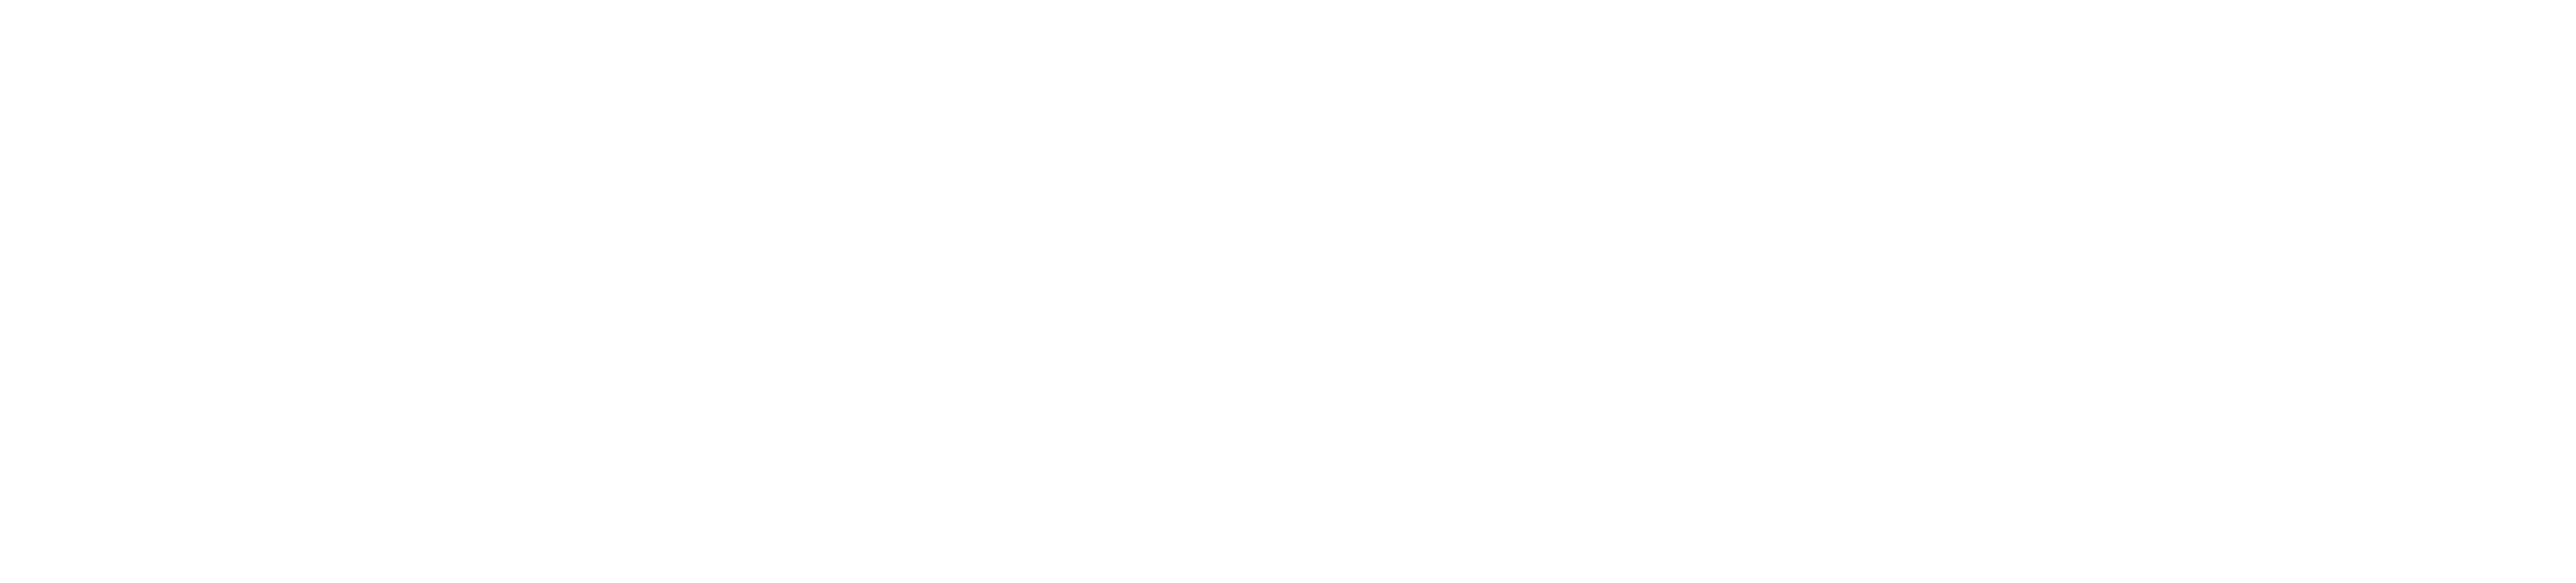 Vector Solutions